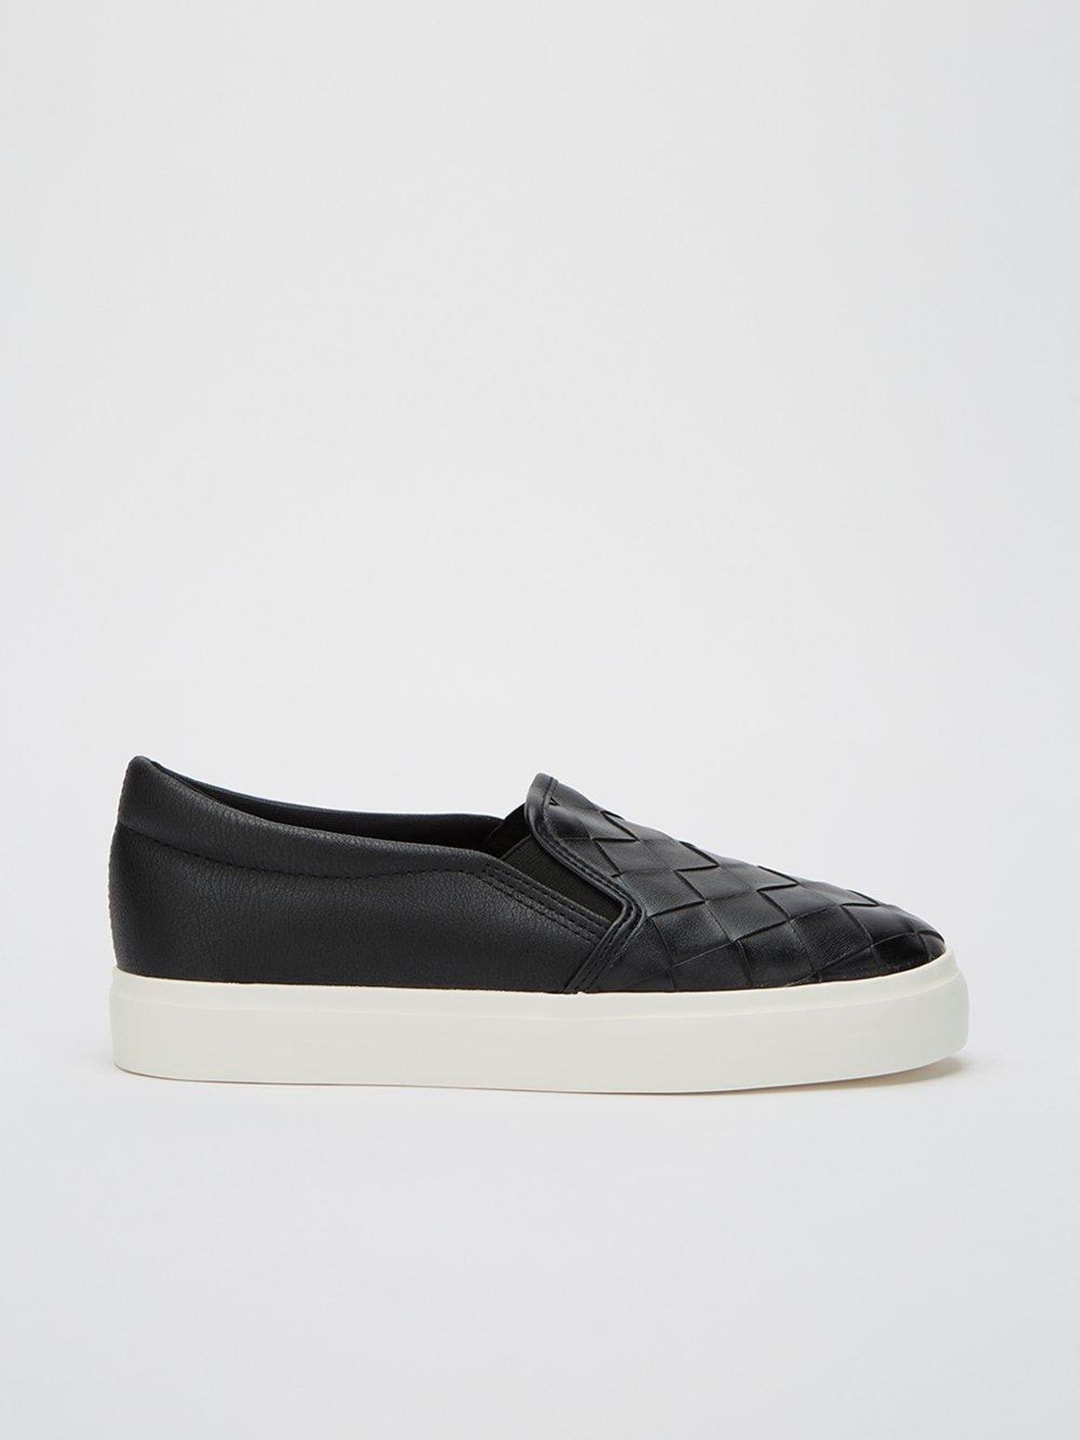 DOROTHY PERKINS Women Black Quilted Sneakers Price in India